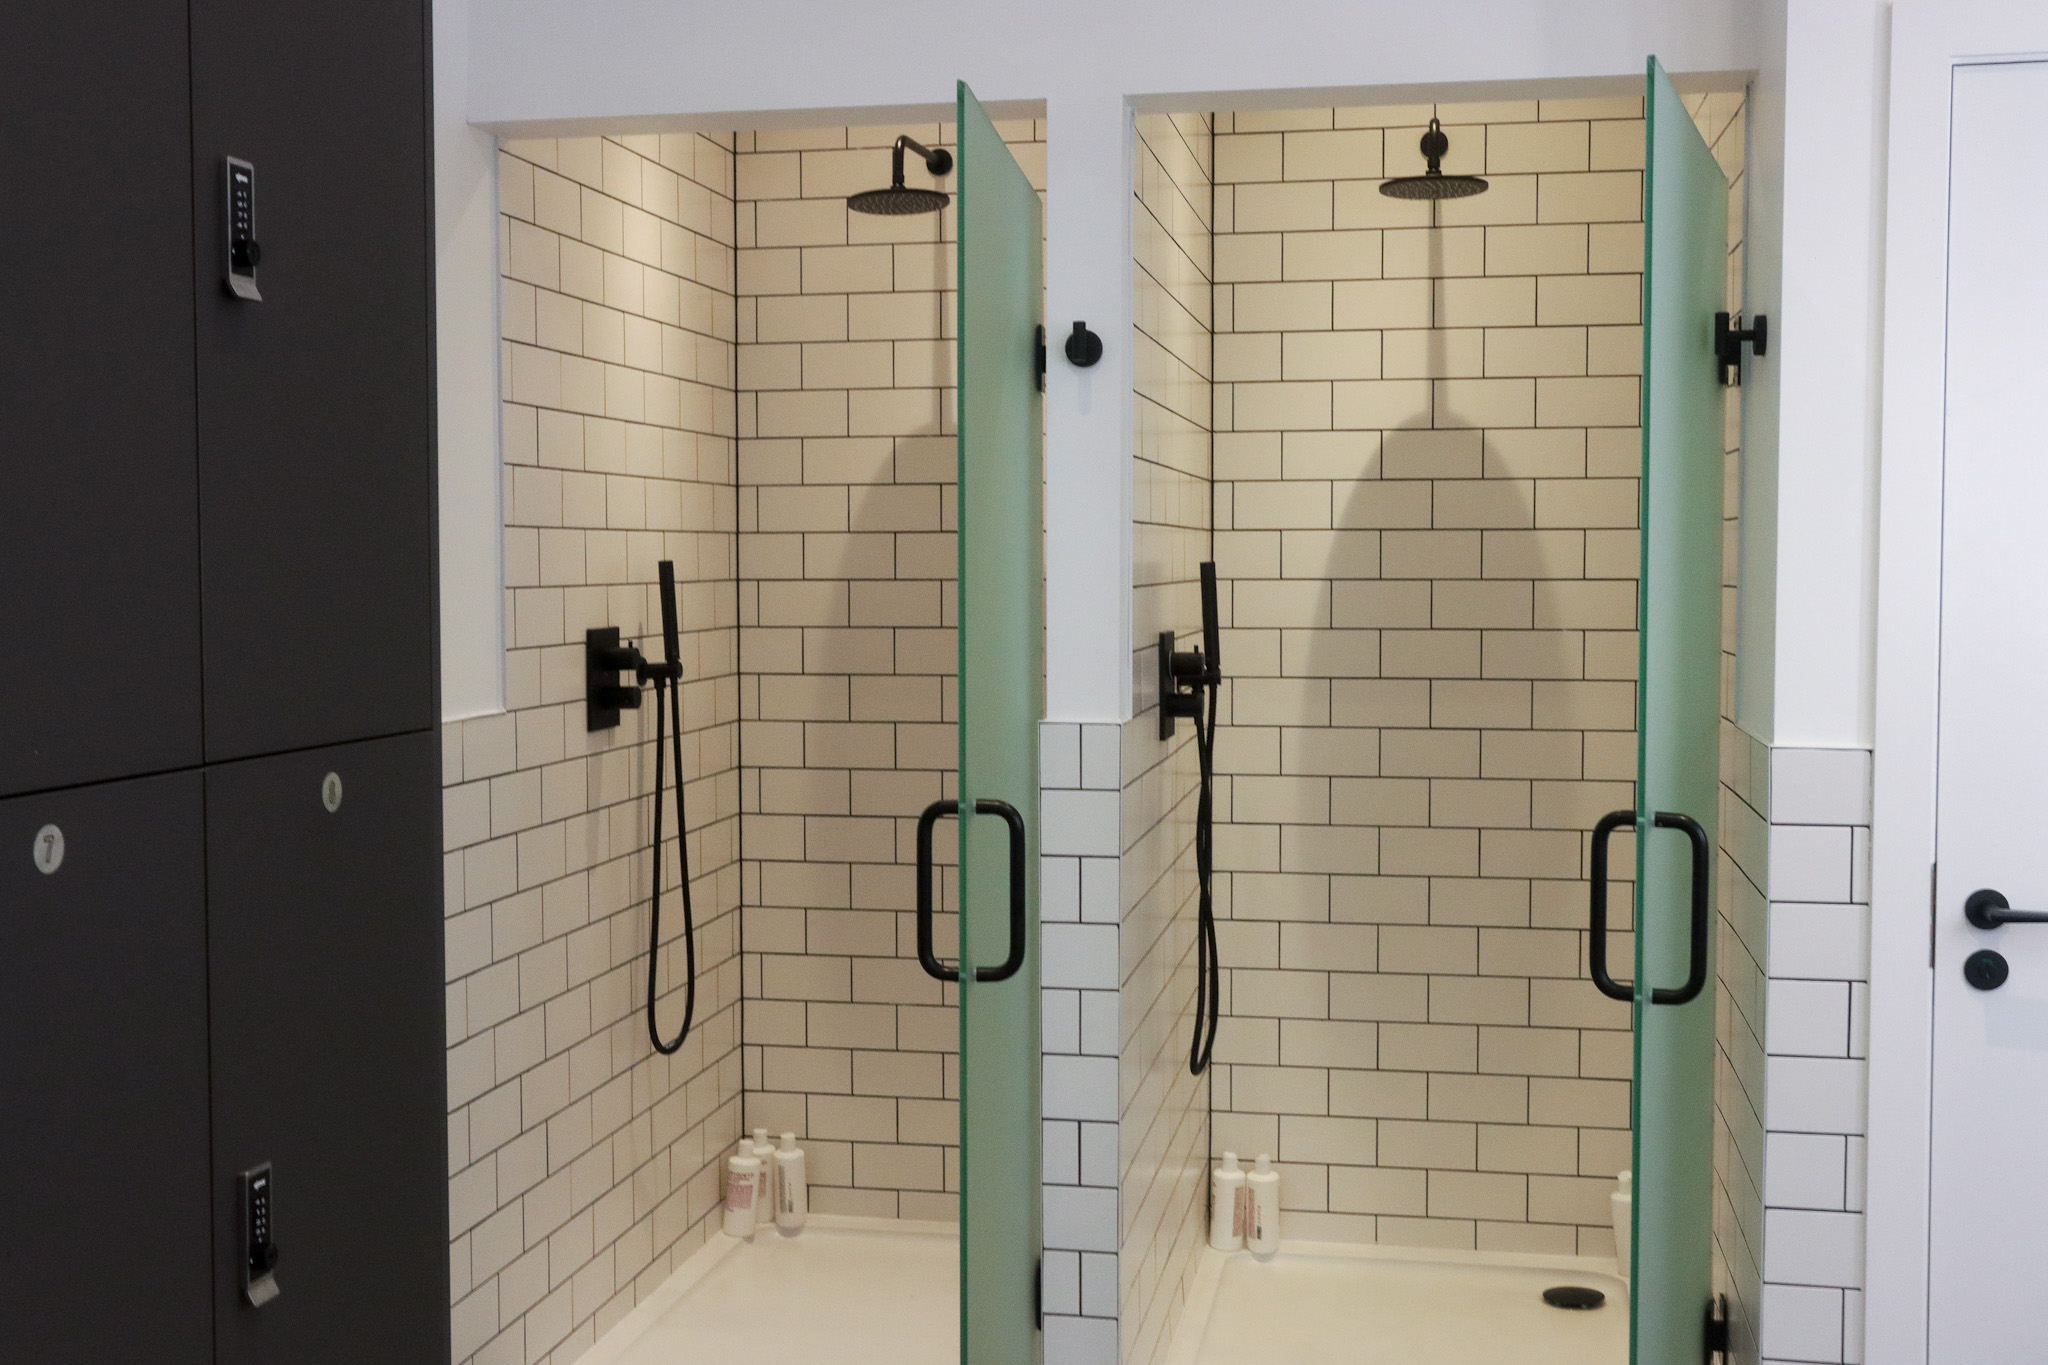 Two shower cubicles next to each other with white tiles.